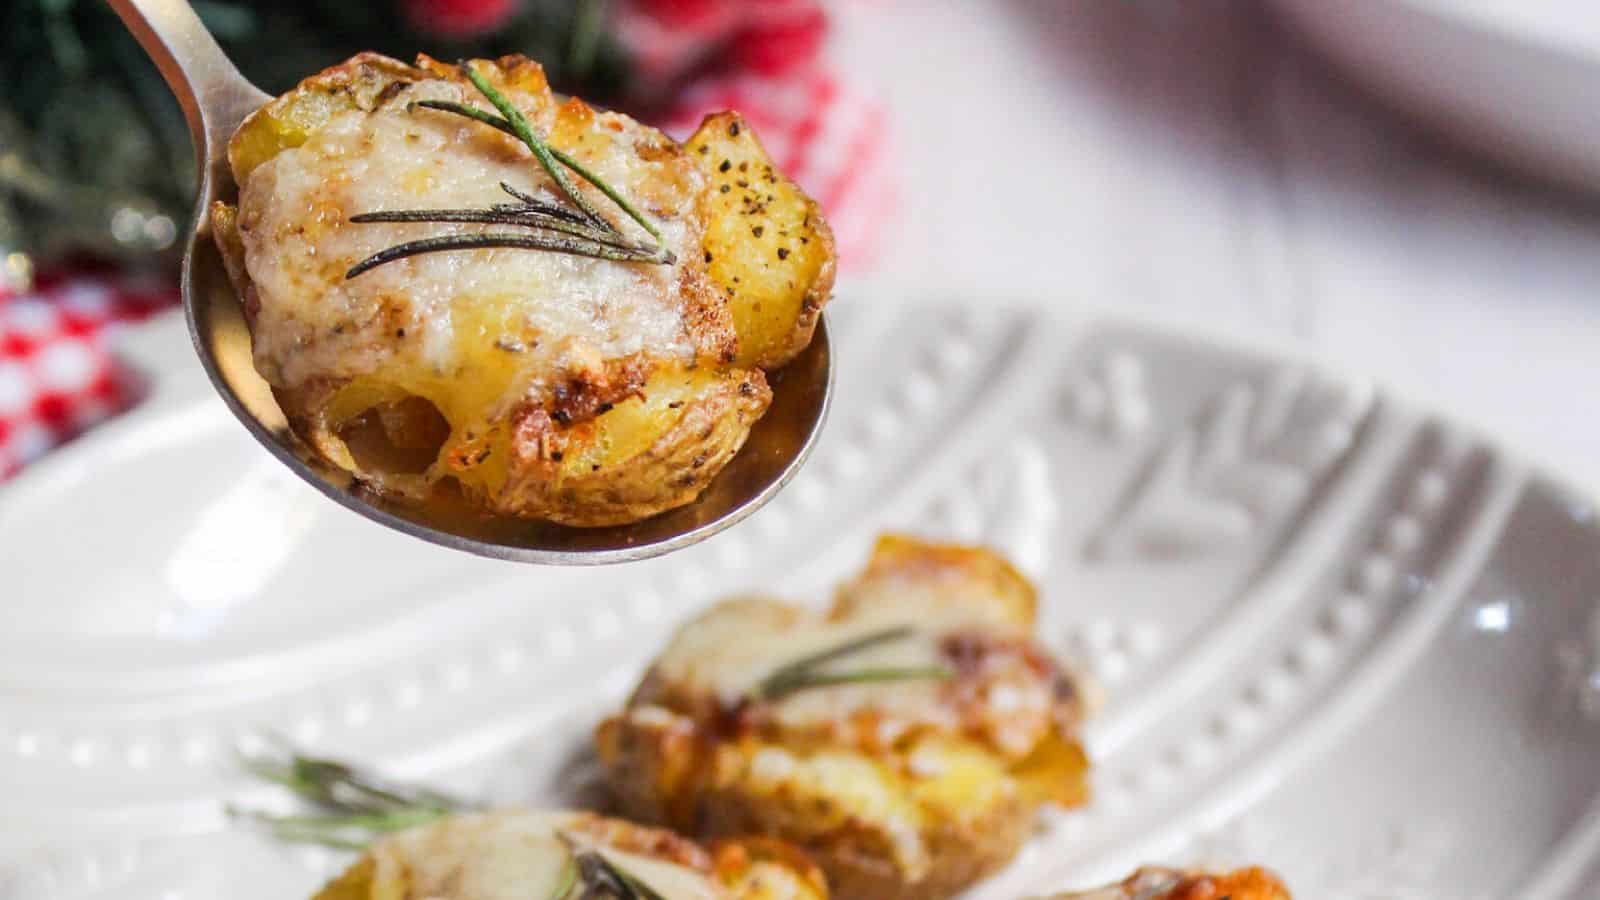 A spoon lifting a smashed potato garnished with rosemary, with a festive table setting in the background.